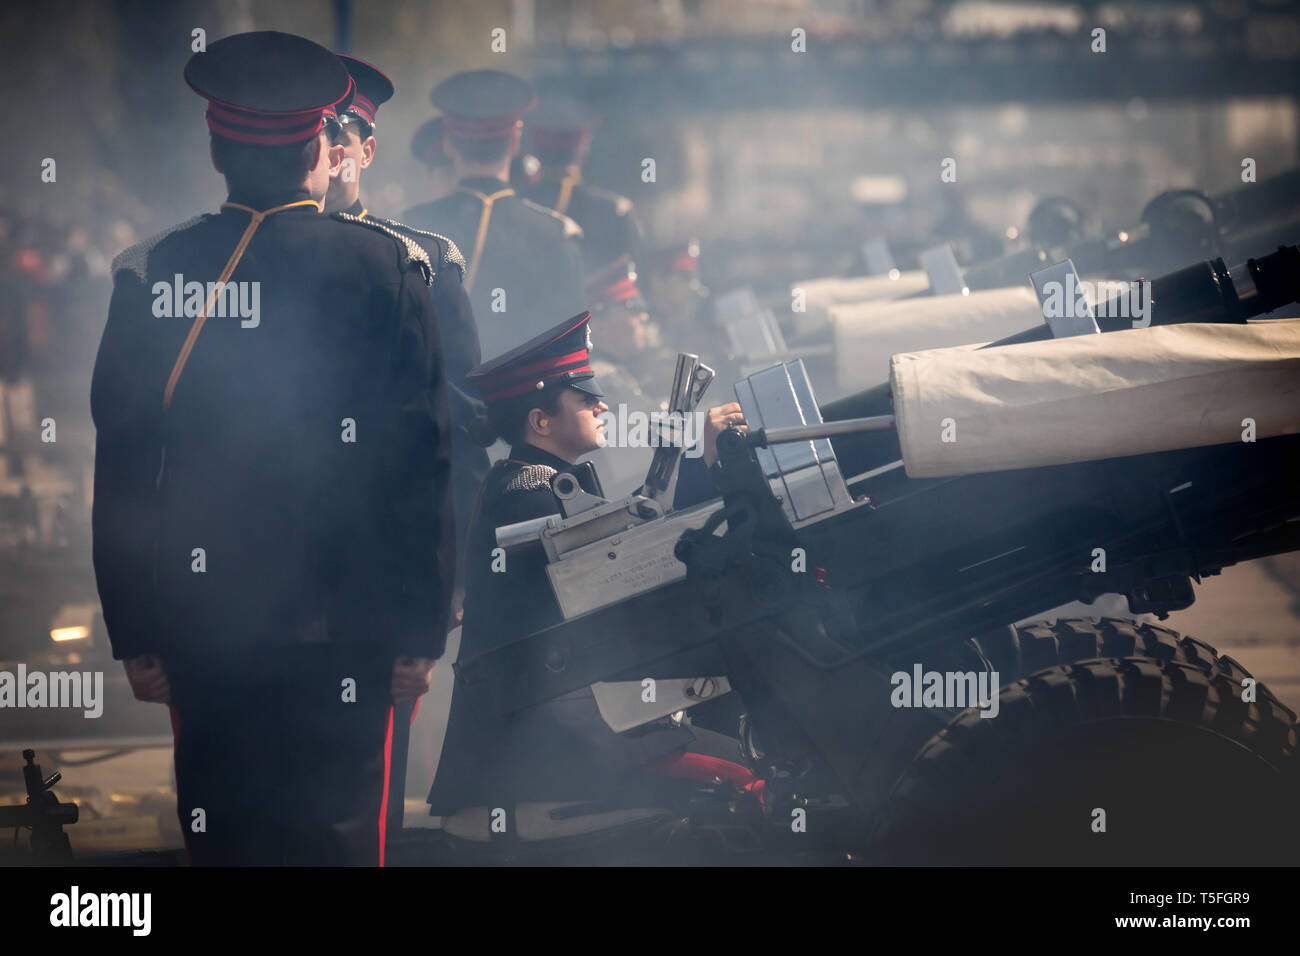 Royal Gun Salute for The Queen's 93rd birthday by the Honourable Artillery Company at HM Tower of London. Stock Photo